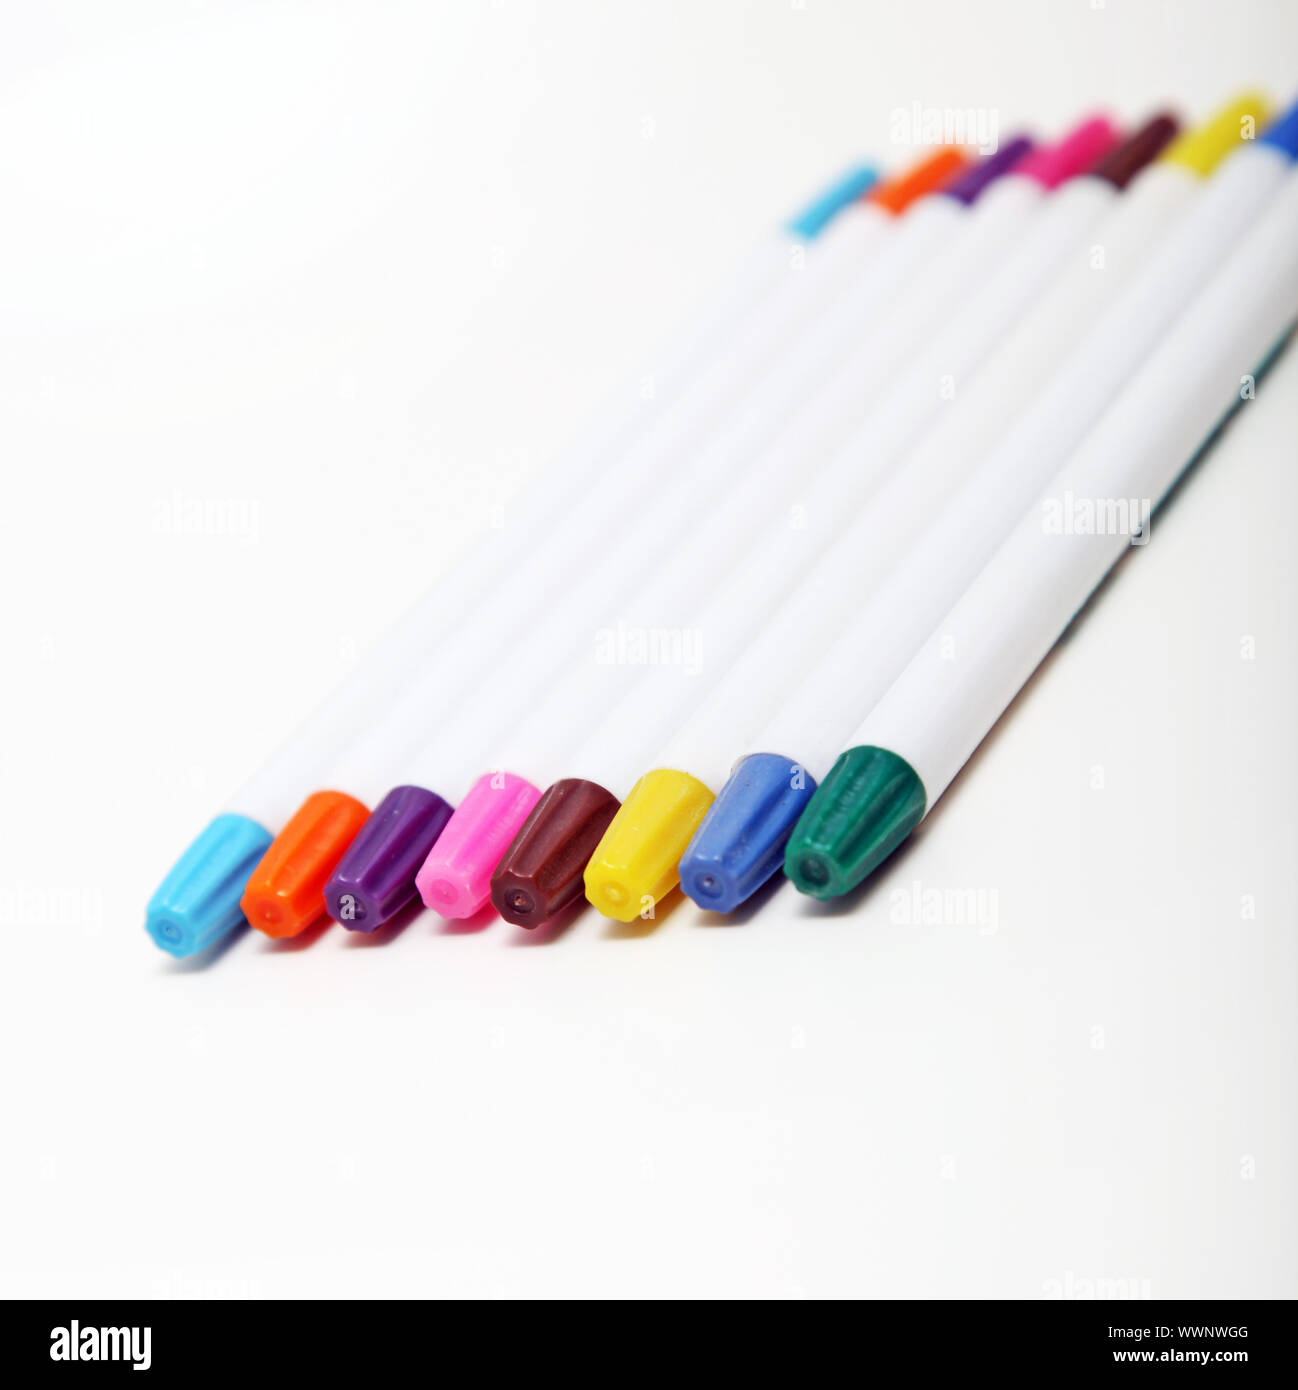 https://c8.alamy.com/comp/WWNWGG/set-of-colourful-felt-tip-pens-in-the-colours-of-the-rainbow-for-use-in-art-lying-at-an-oblique-angle-on-a-white-background-WWNWGG.jpg